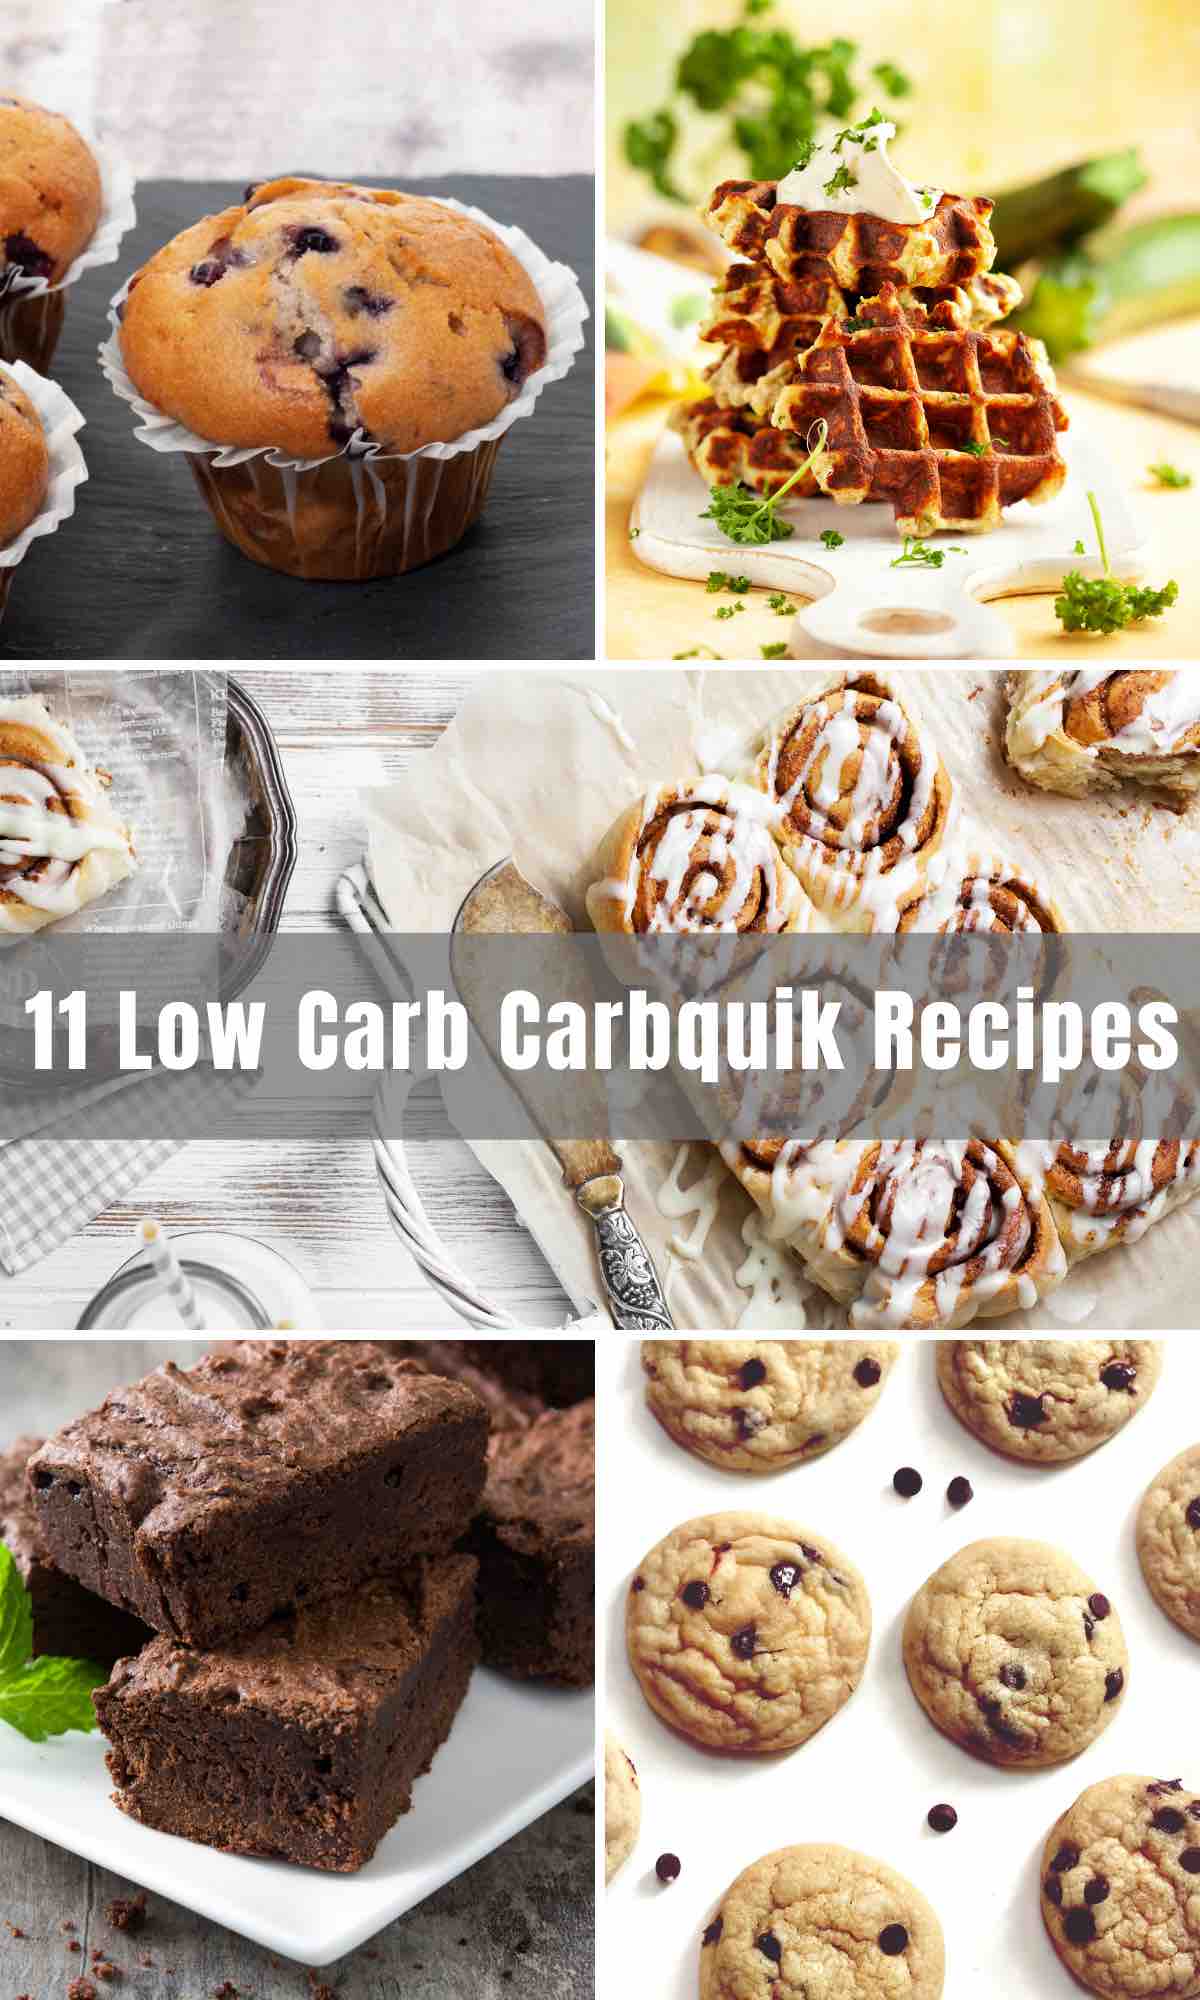 We've rounded up 11 Best Carbquik Recipes that are all low-carb and keto-friendly. So if you're wondering "what can I make with Carbquik baking mixing?" you have come to the right place!